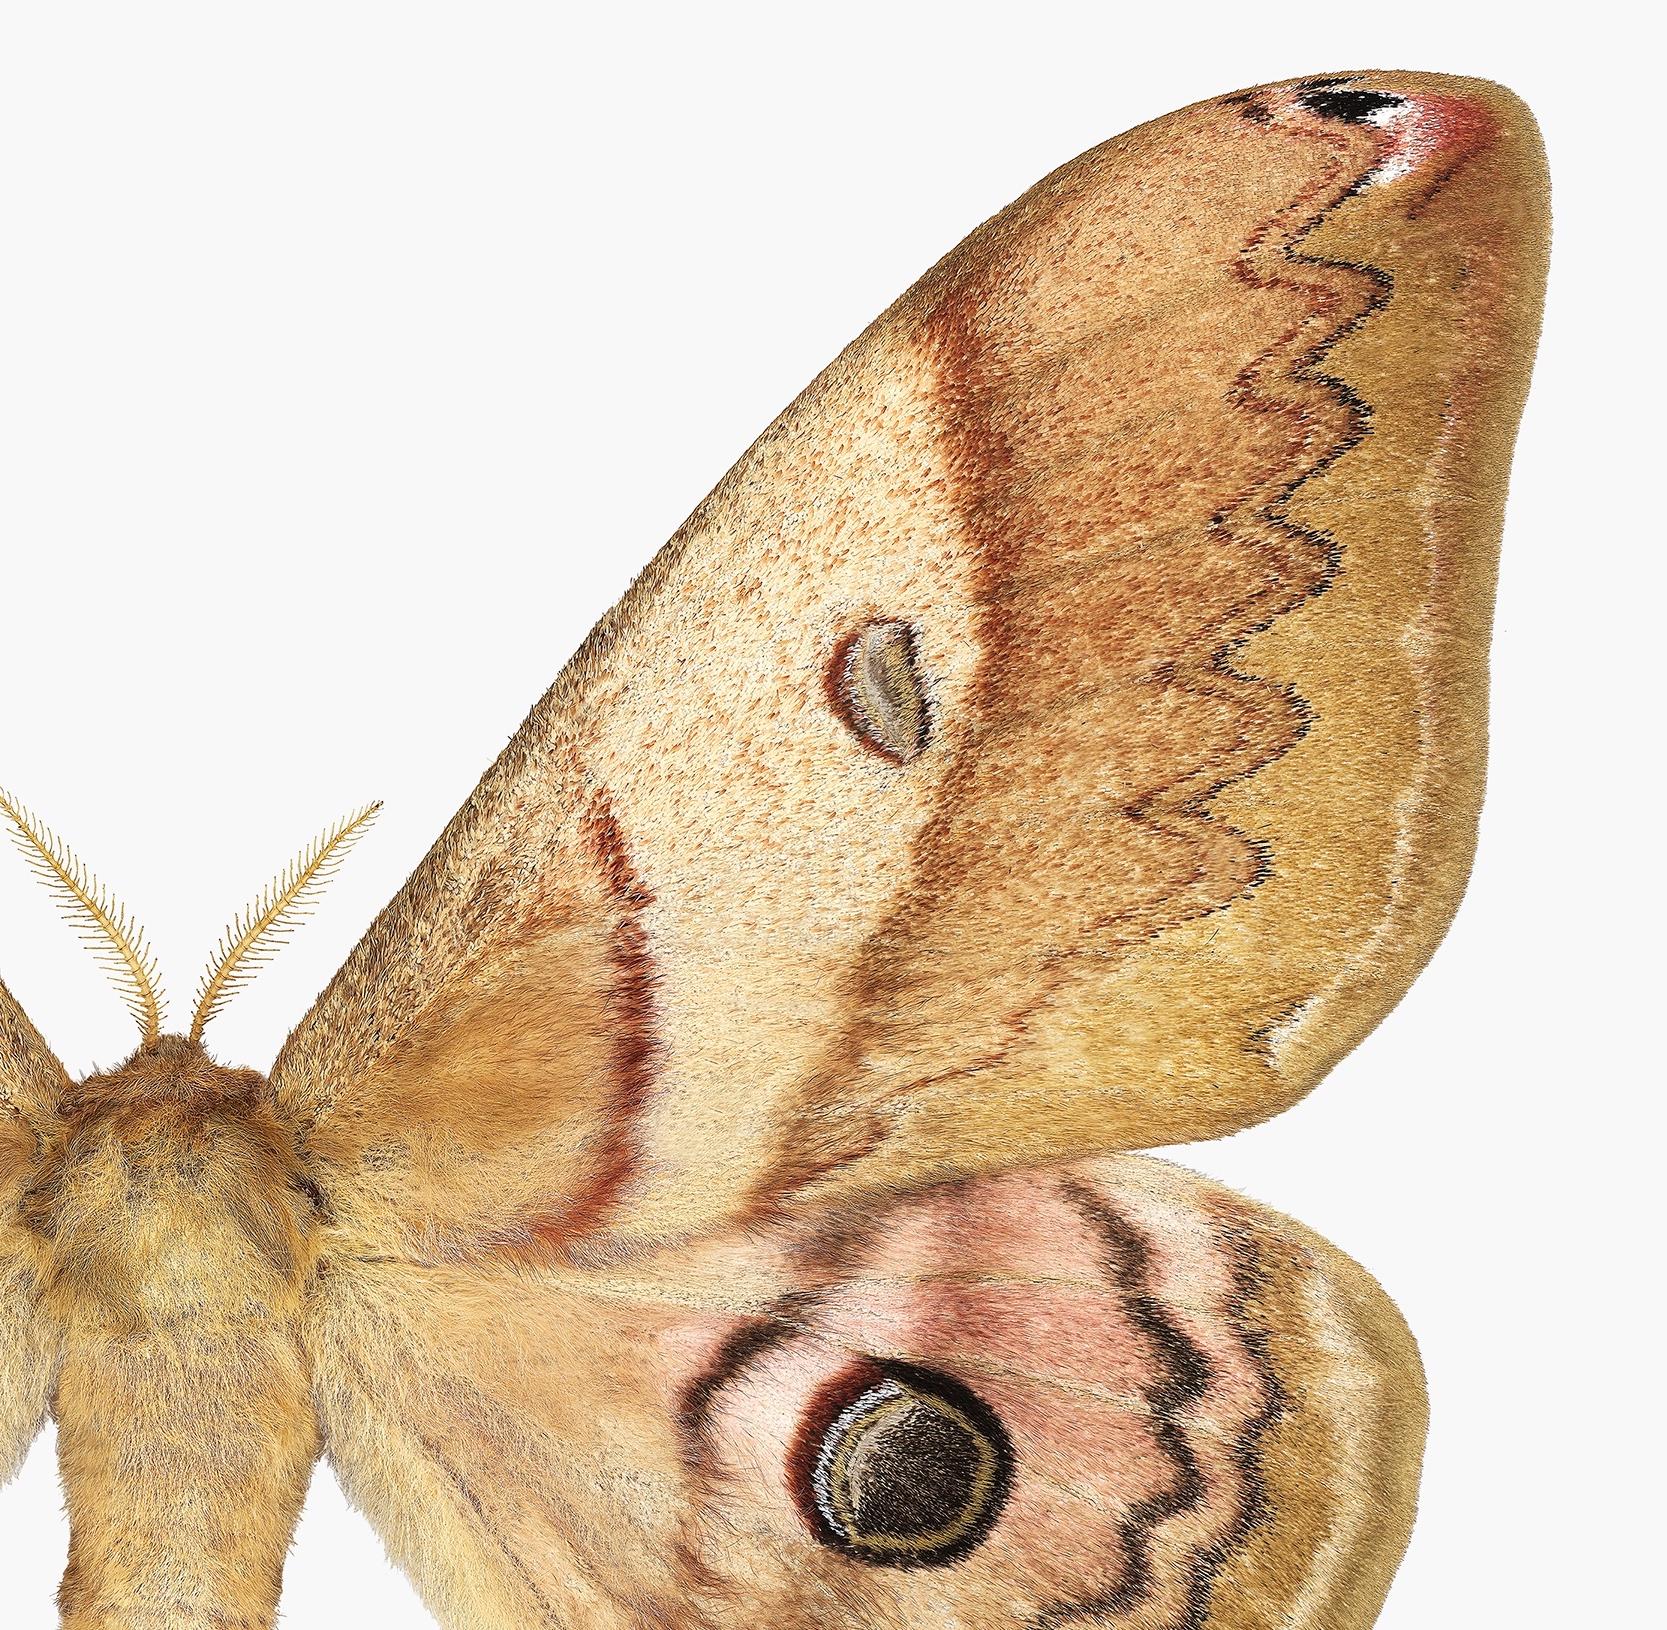 Caligula Japonica Female, Golden Brown, Ochre Moth White, Winged Insect Nature - Contemporary Photograph by Joseph Scheer